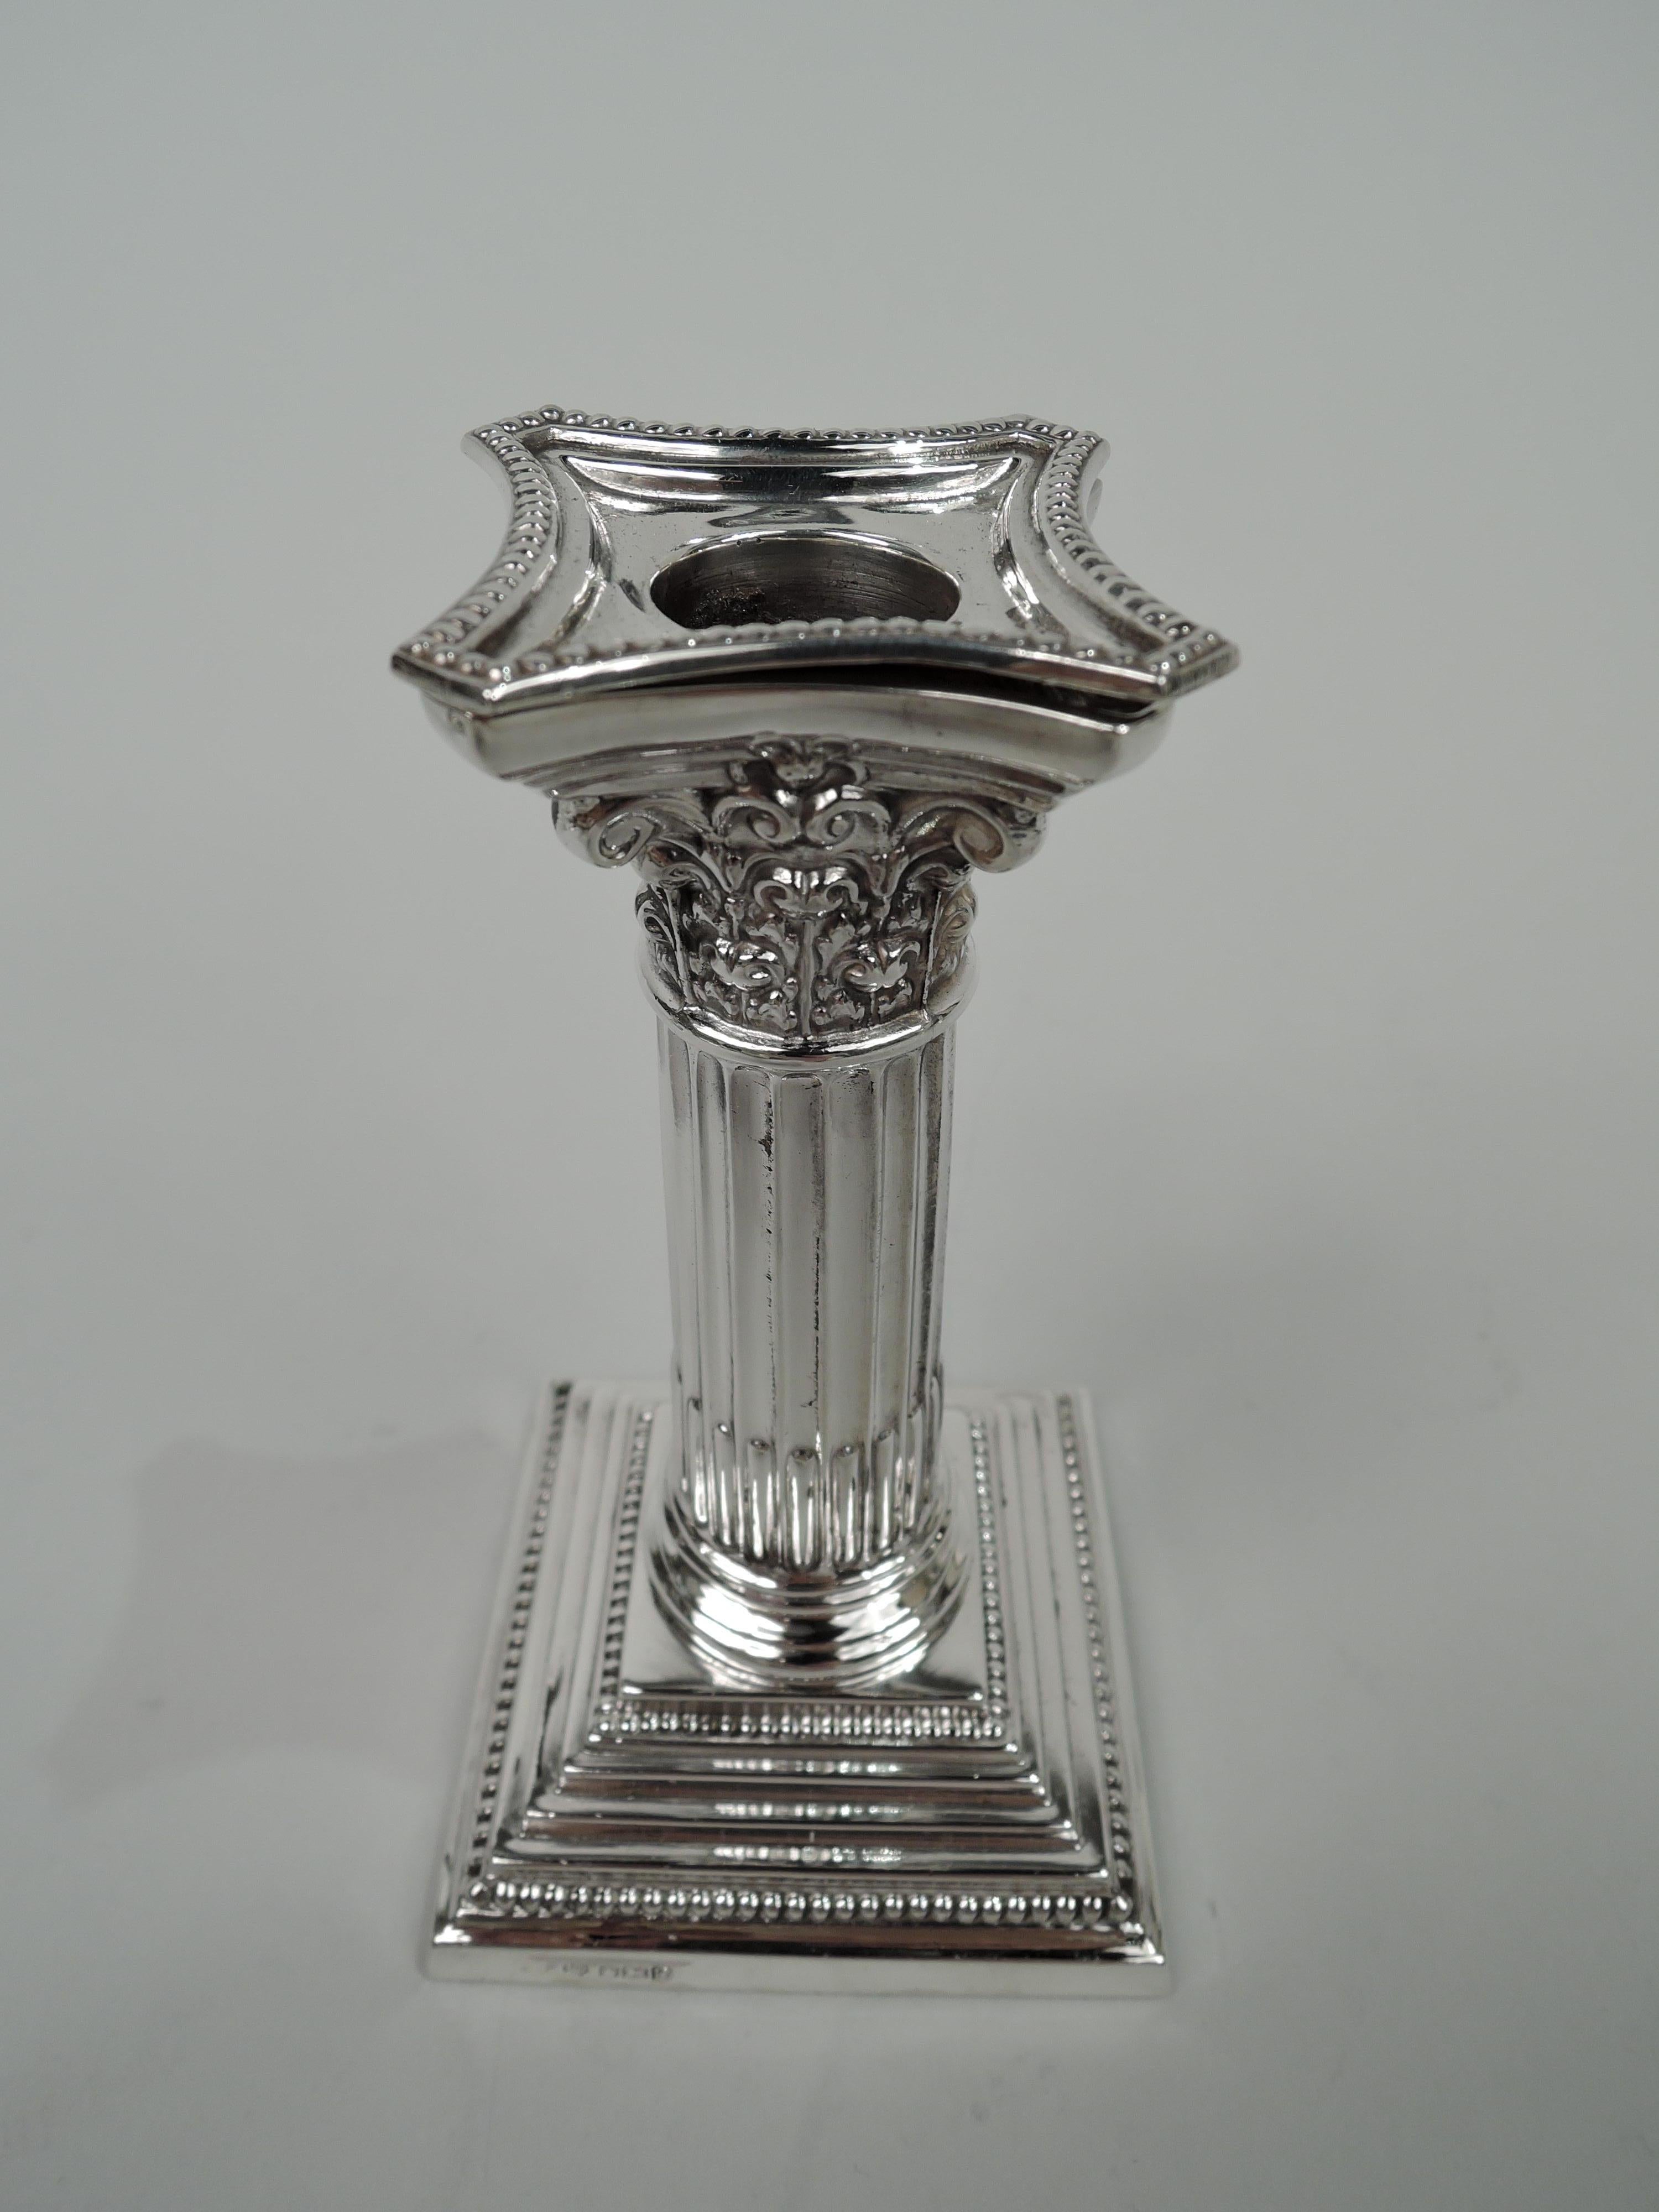 Pair of English Neoclassical sterling silver candlesticks, 1957-9. Each: Traditional column with stop-fluted shaft on stepped square foot. Composite Corinthian capital with concave sides and detachable bobeche. Beading. Fully marked including 1957